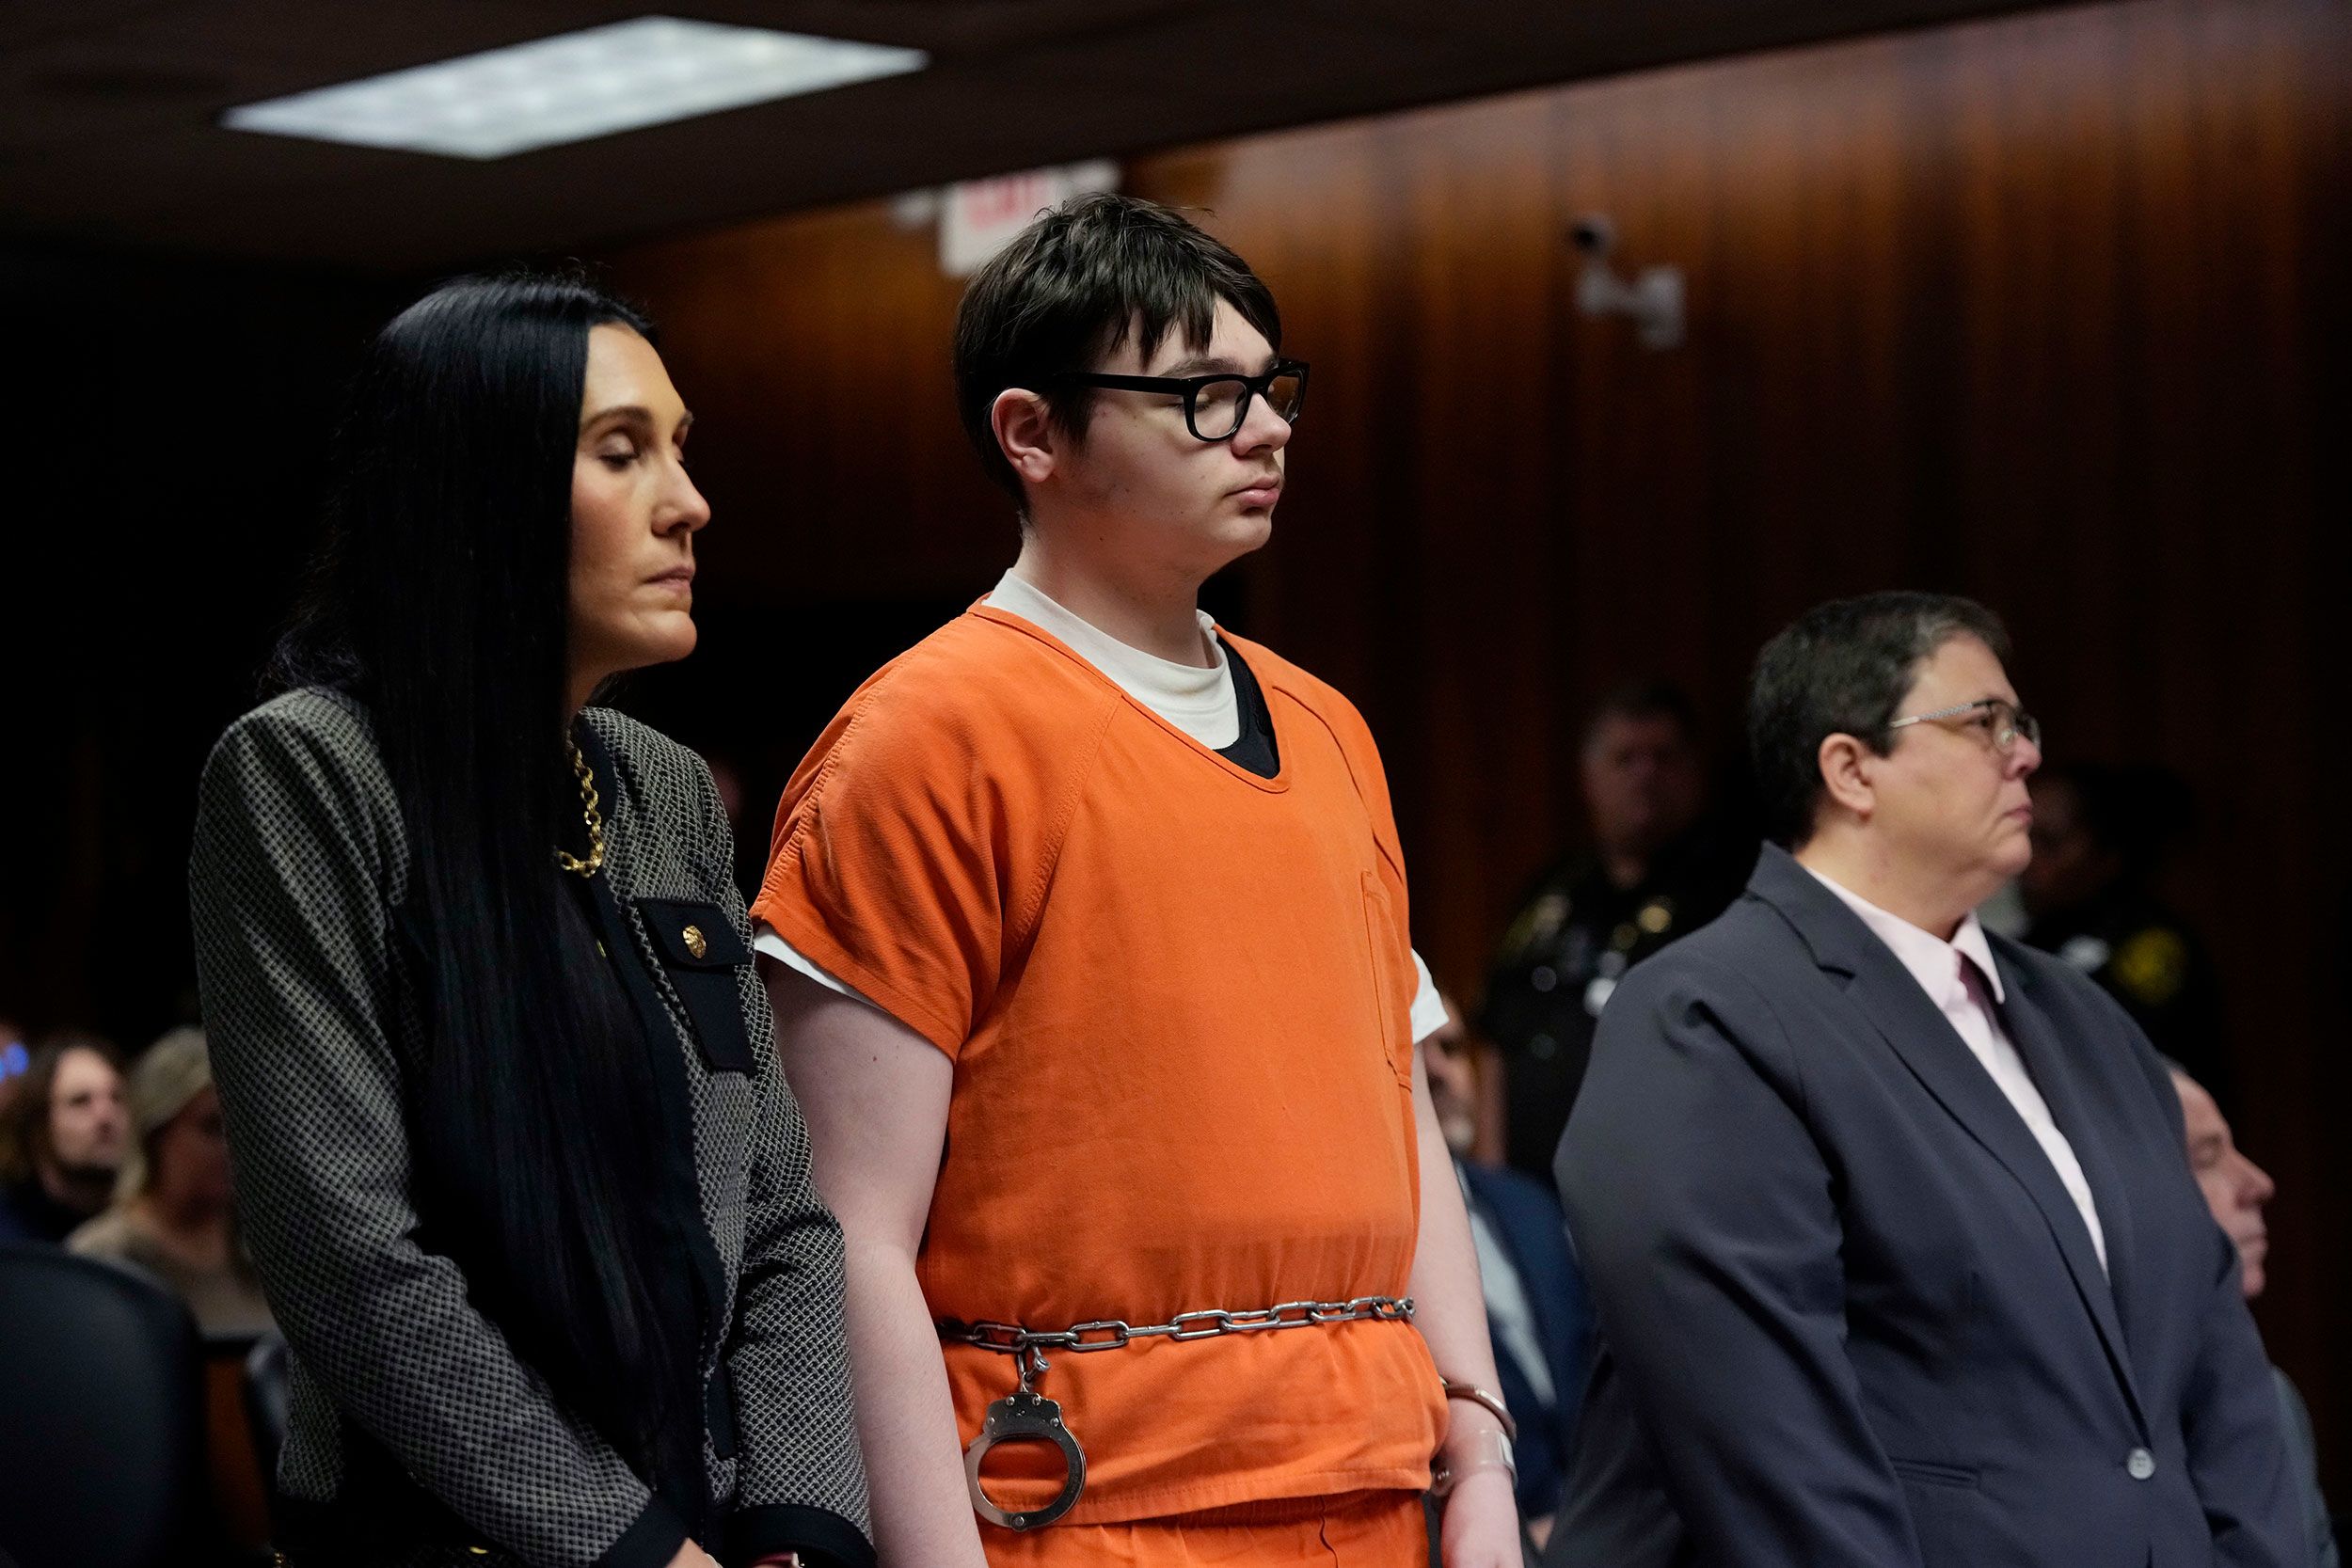 Ethan Crumbley sentenced to life in prison without parole for killing 4  students in Michigan school shooting | CNN